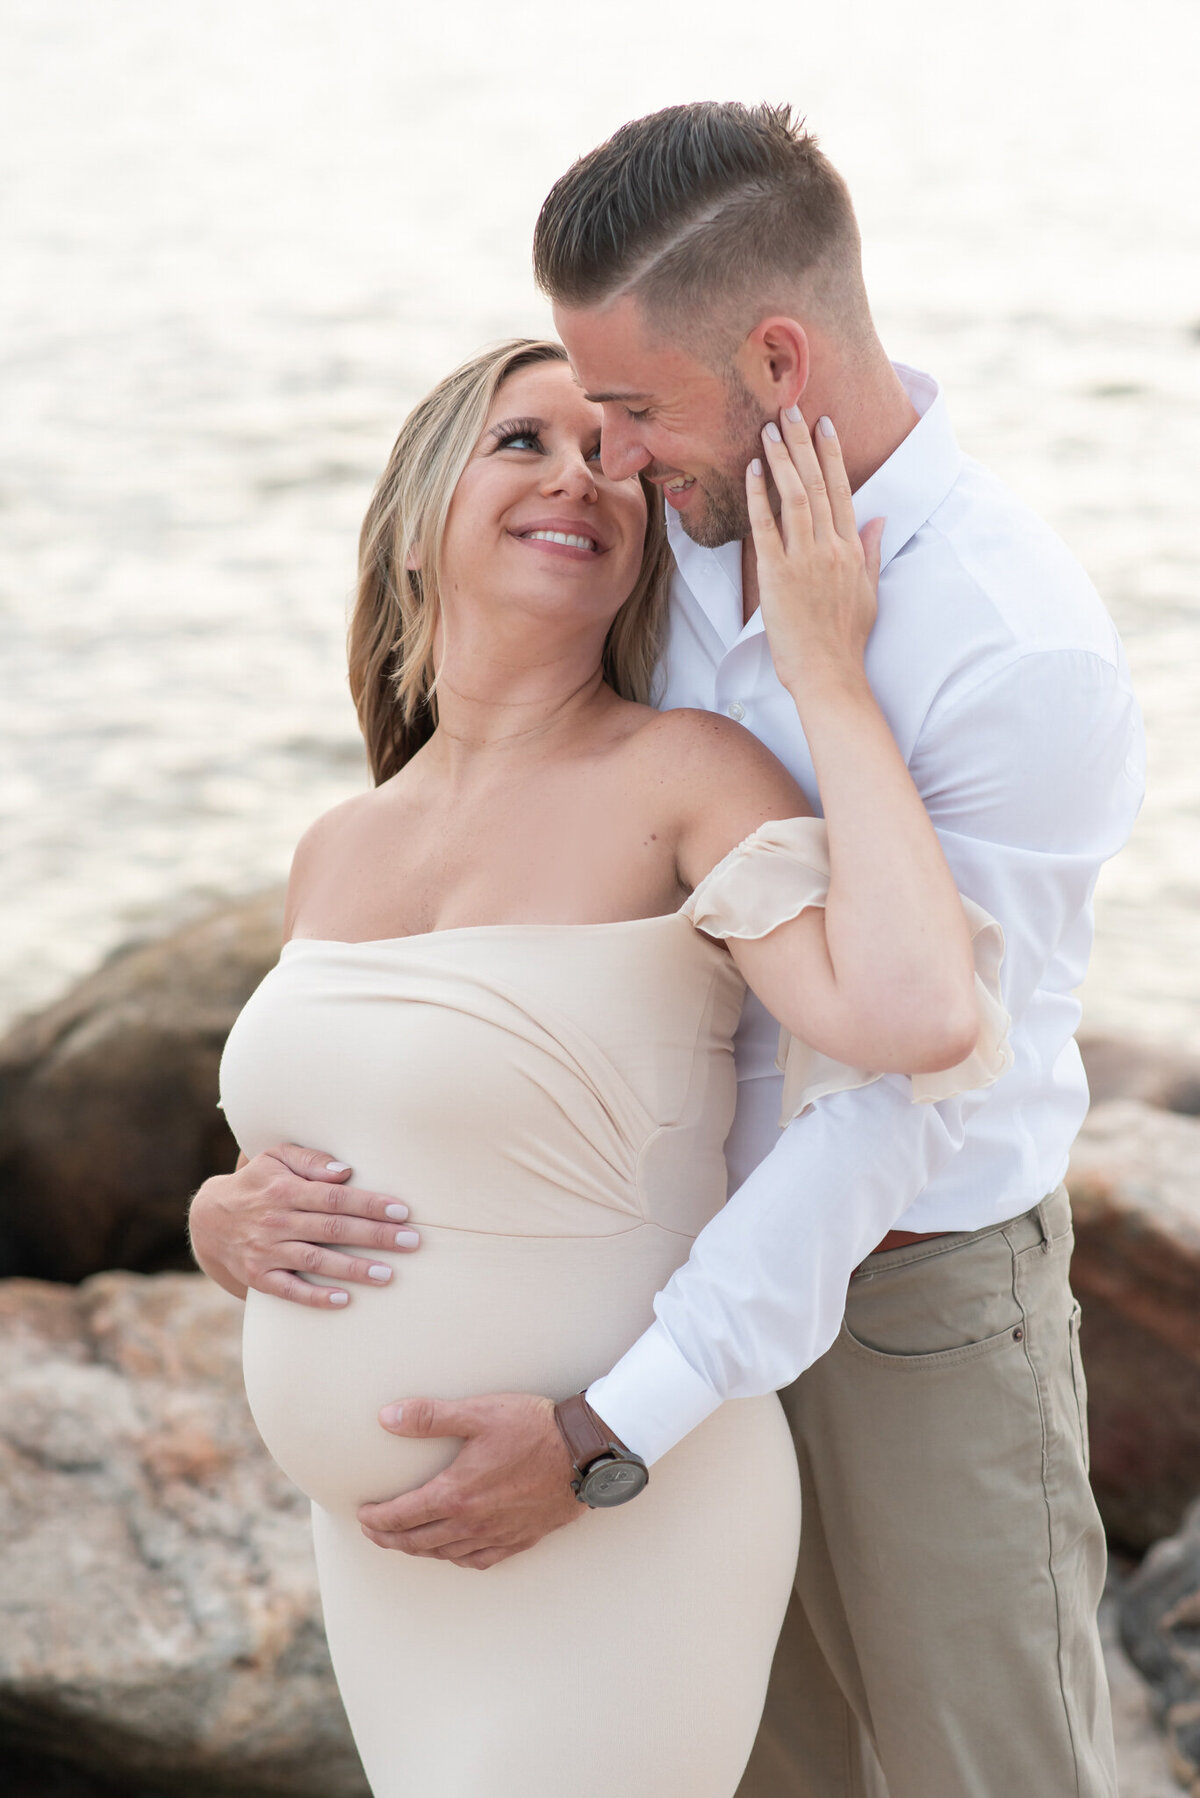 Pregnant couple embracing on the beach